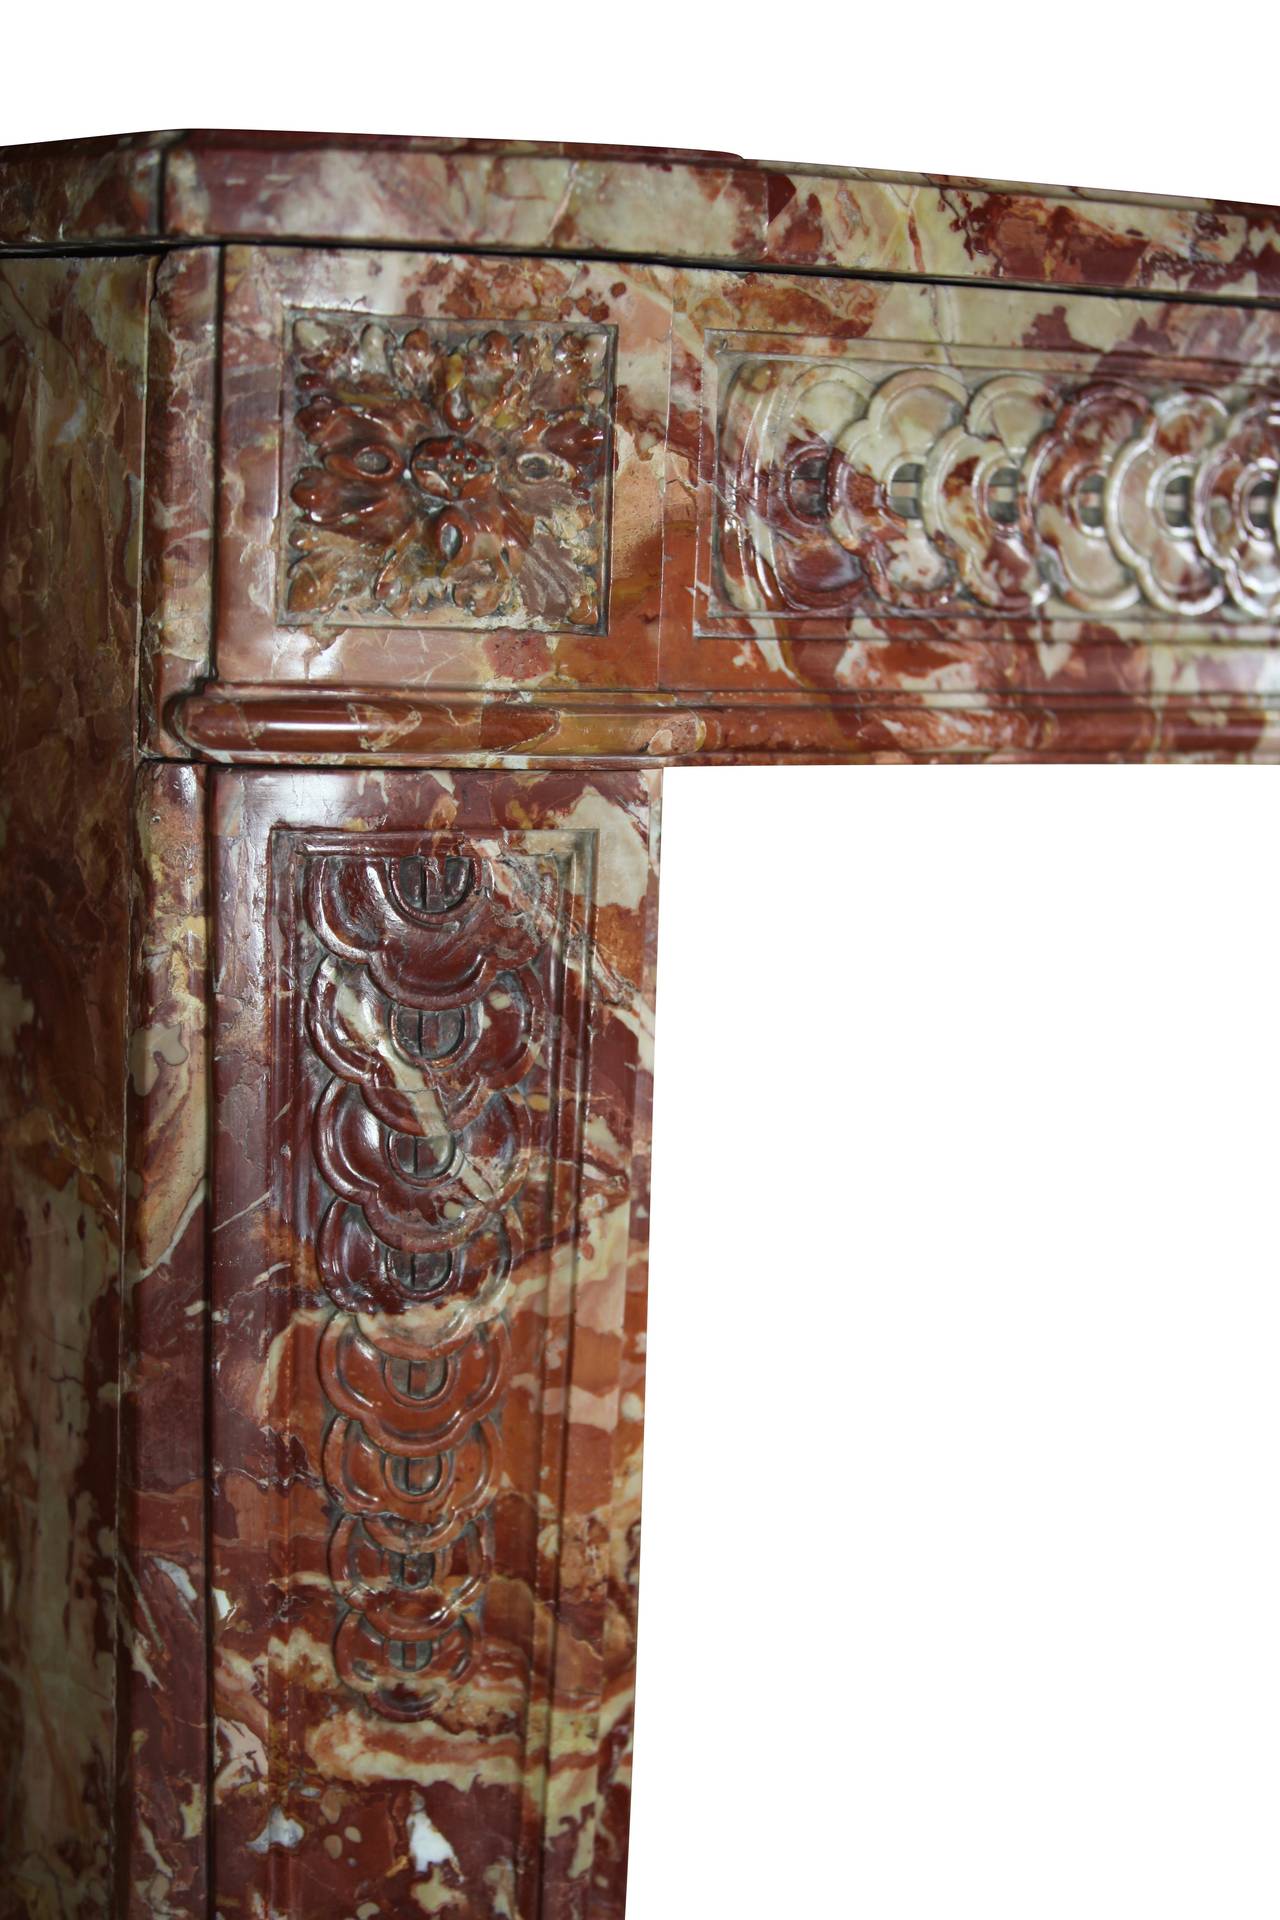 The deep color of the marble reflect the wealth and power of the original owner. This original antique fireplace surround is from the Louis XVI period. This is a very unique and commanding piece. A grand piece for a High end interior design.